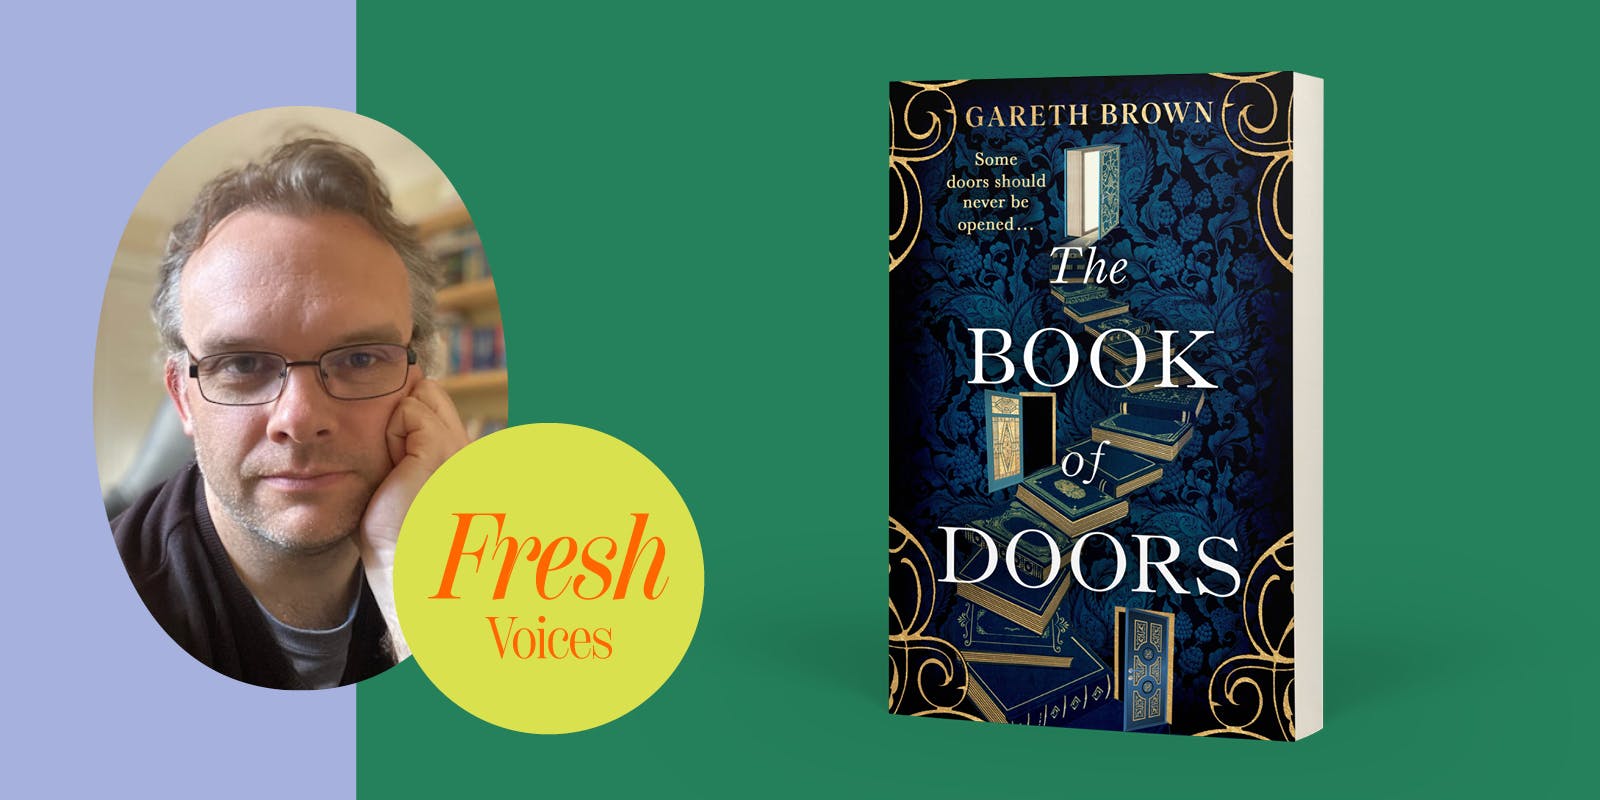 Gareth Brown shares how a yearning to travel inspired The Book of Doors